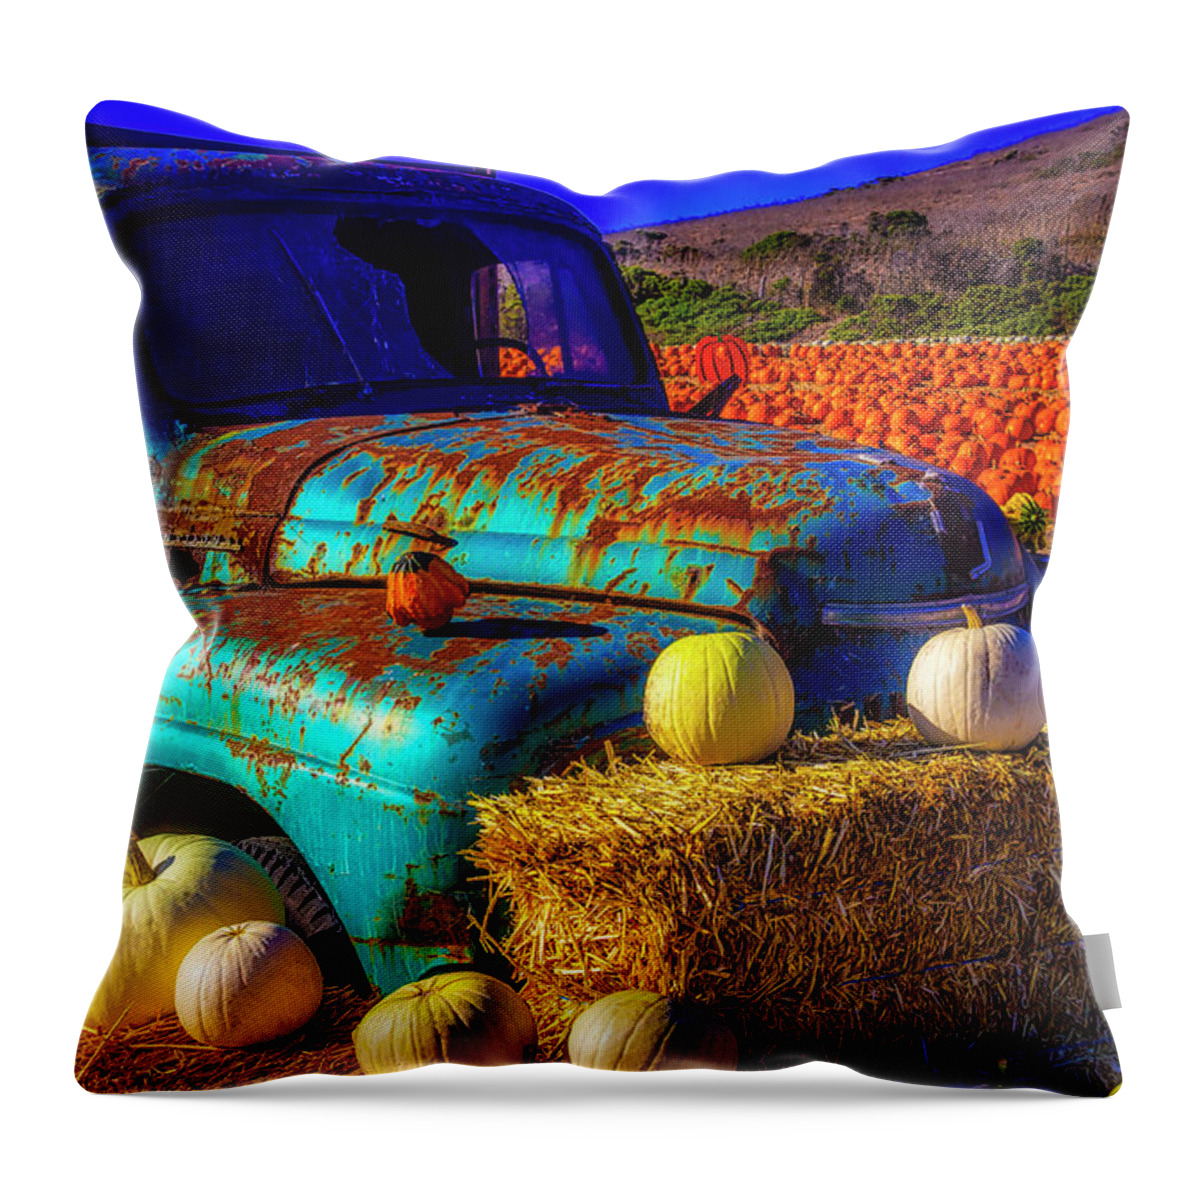 Old Rodoni Farm Truck Throw Pillow featuring the photograph Old Rodoni Farm Truck by Garry Gay